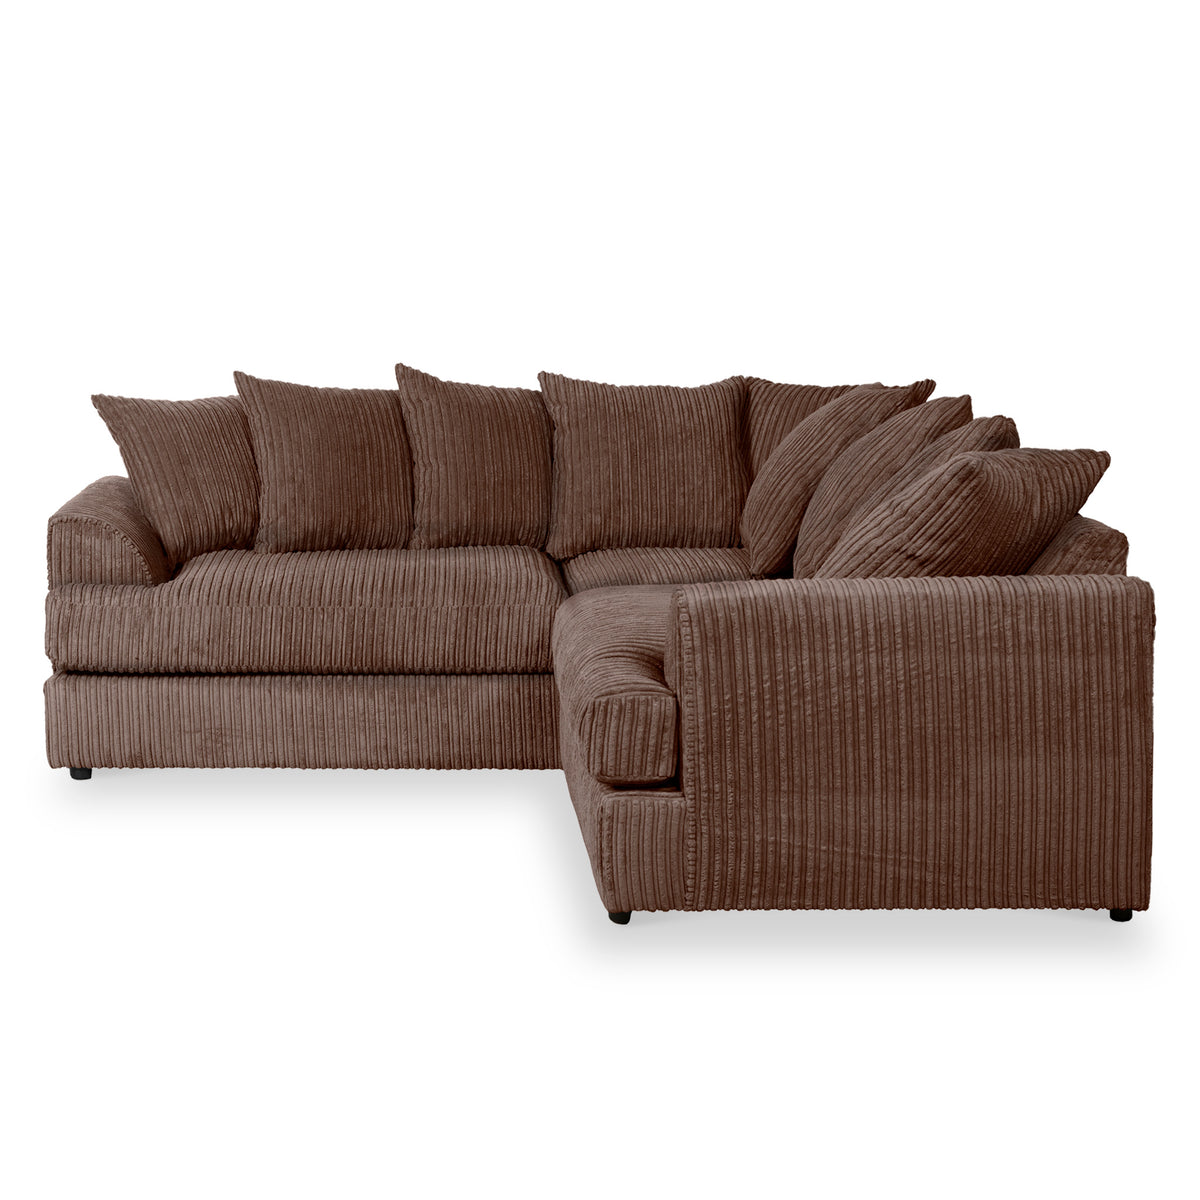 Bletchley Chocolate Jumbo Cord Corner Couch